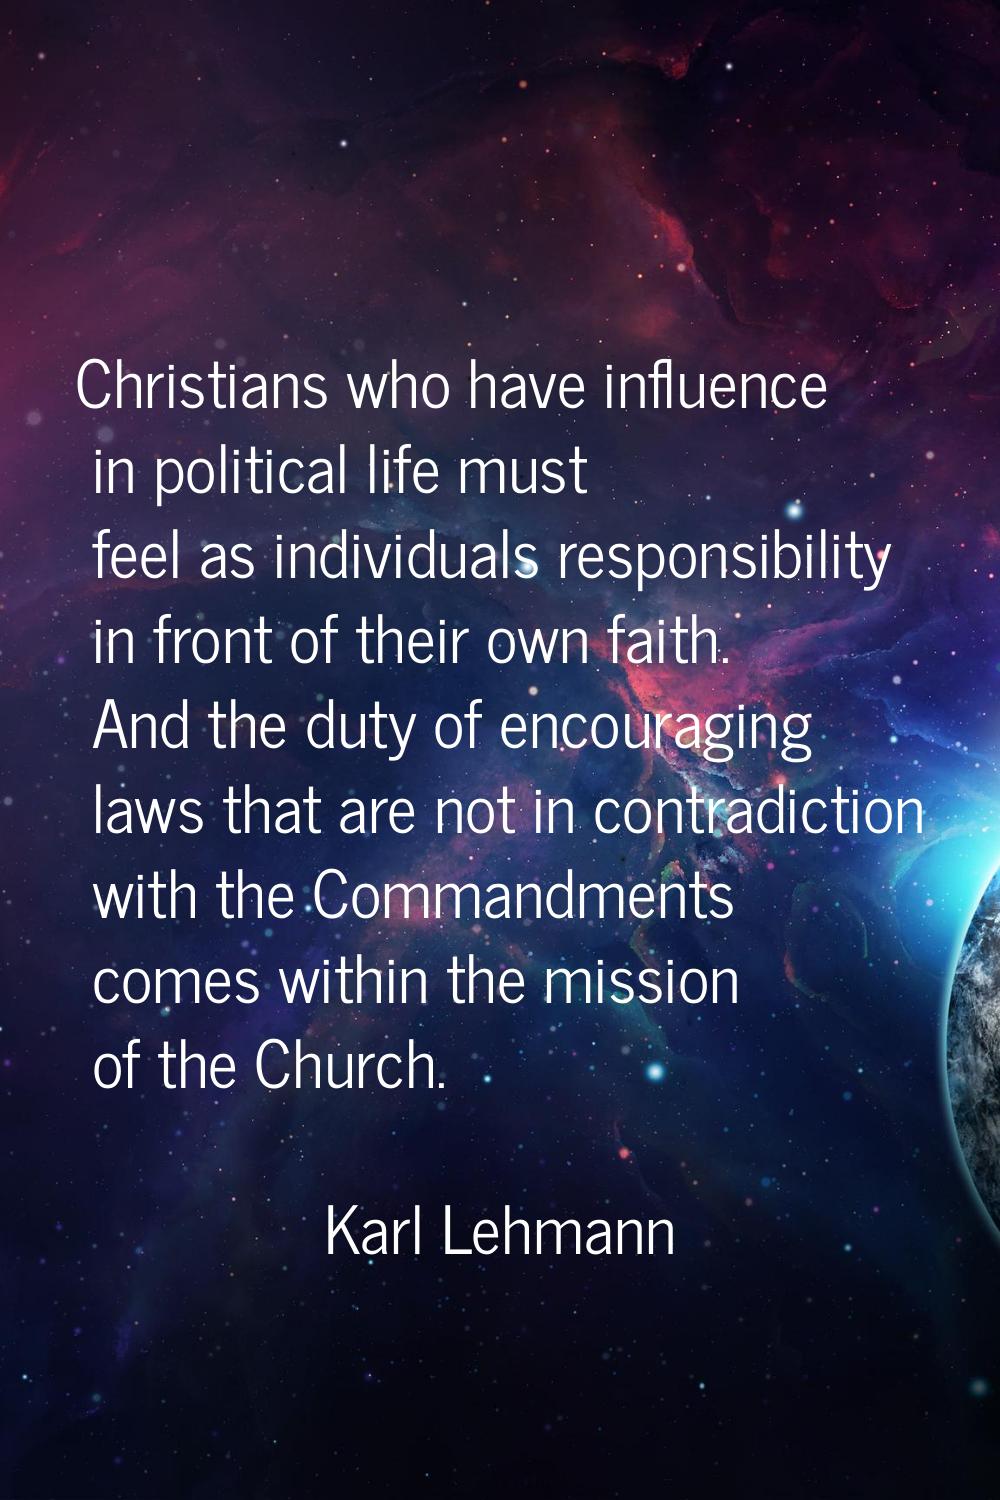 Christians who have influence in political life must feel as individuals responsibility in front of